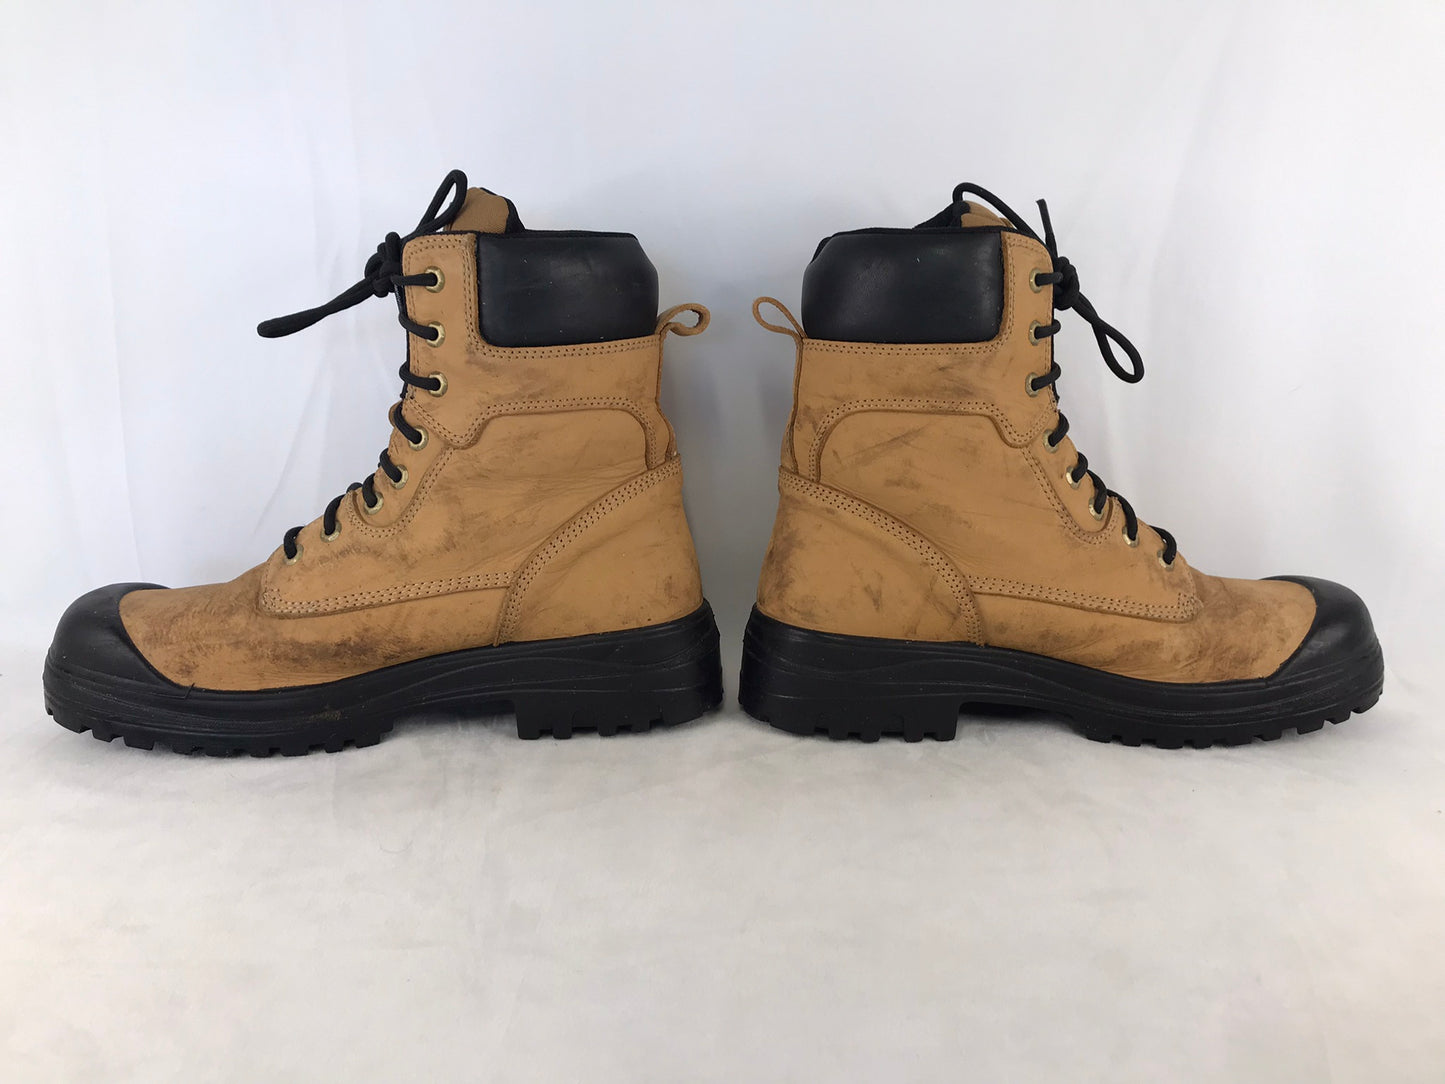 Work Boots Men's Size 10.5 Dakota Leather SA Approved With Steel Toe leather Worn Once